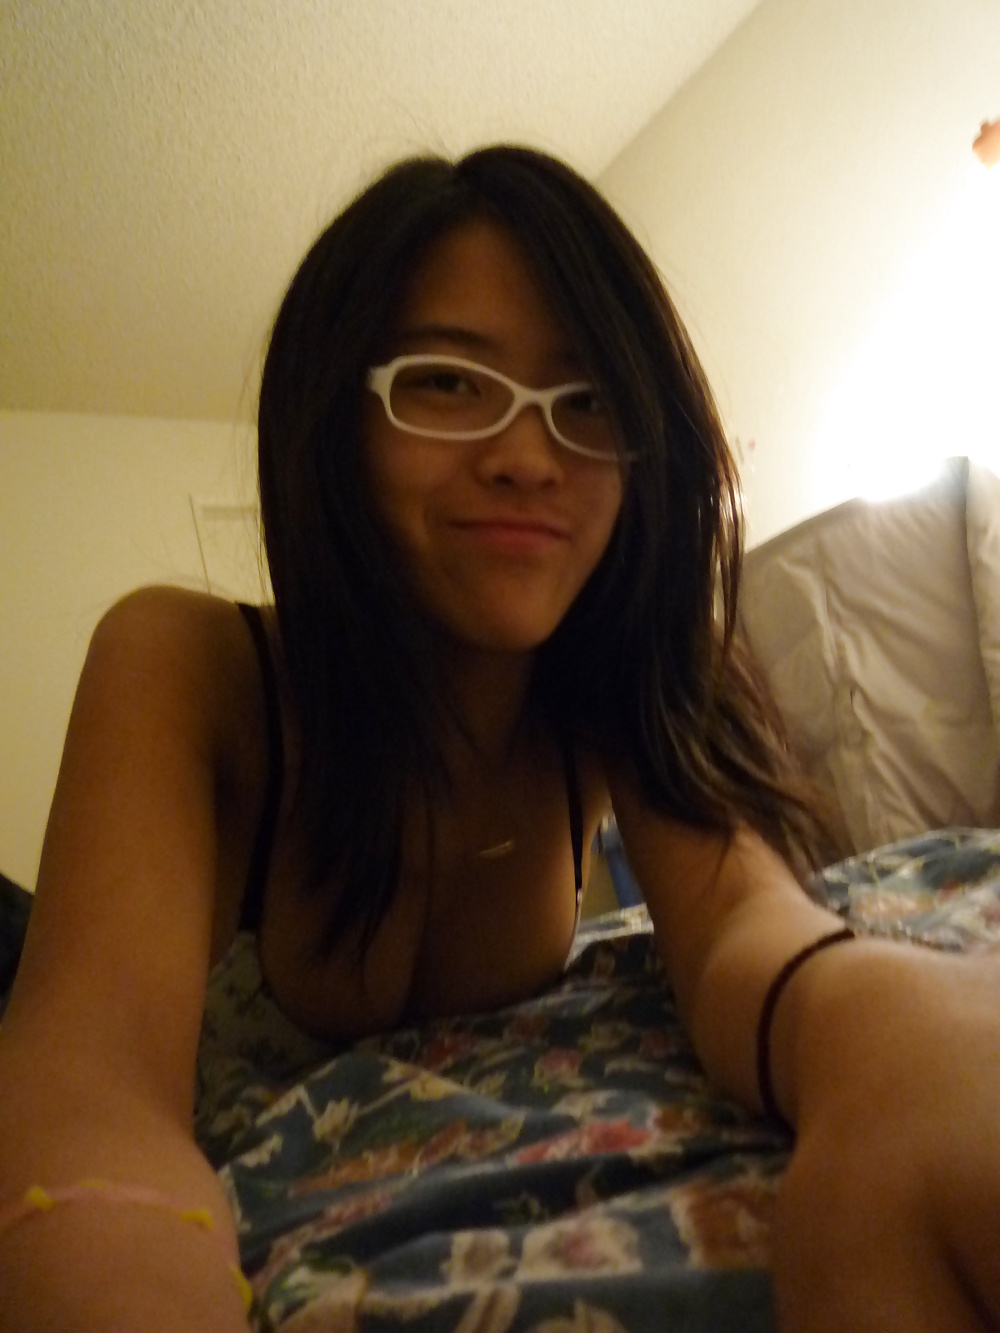 Sexy asian teen with glasses #30188243